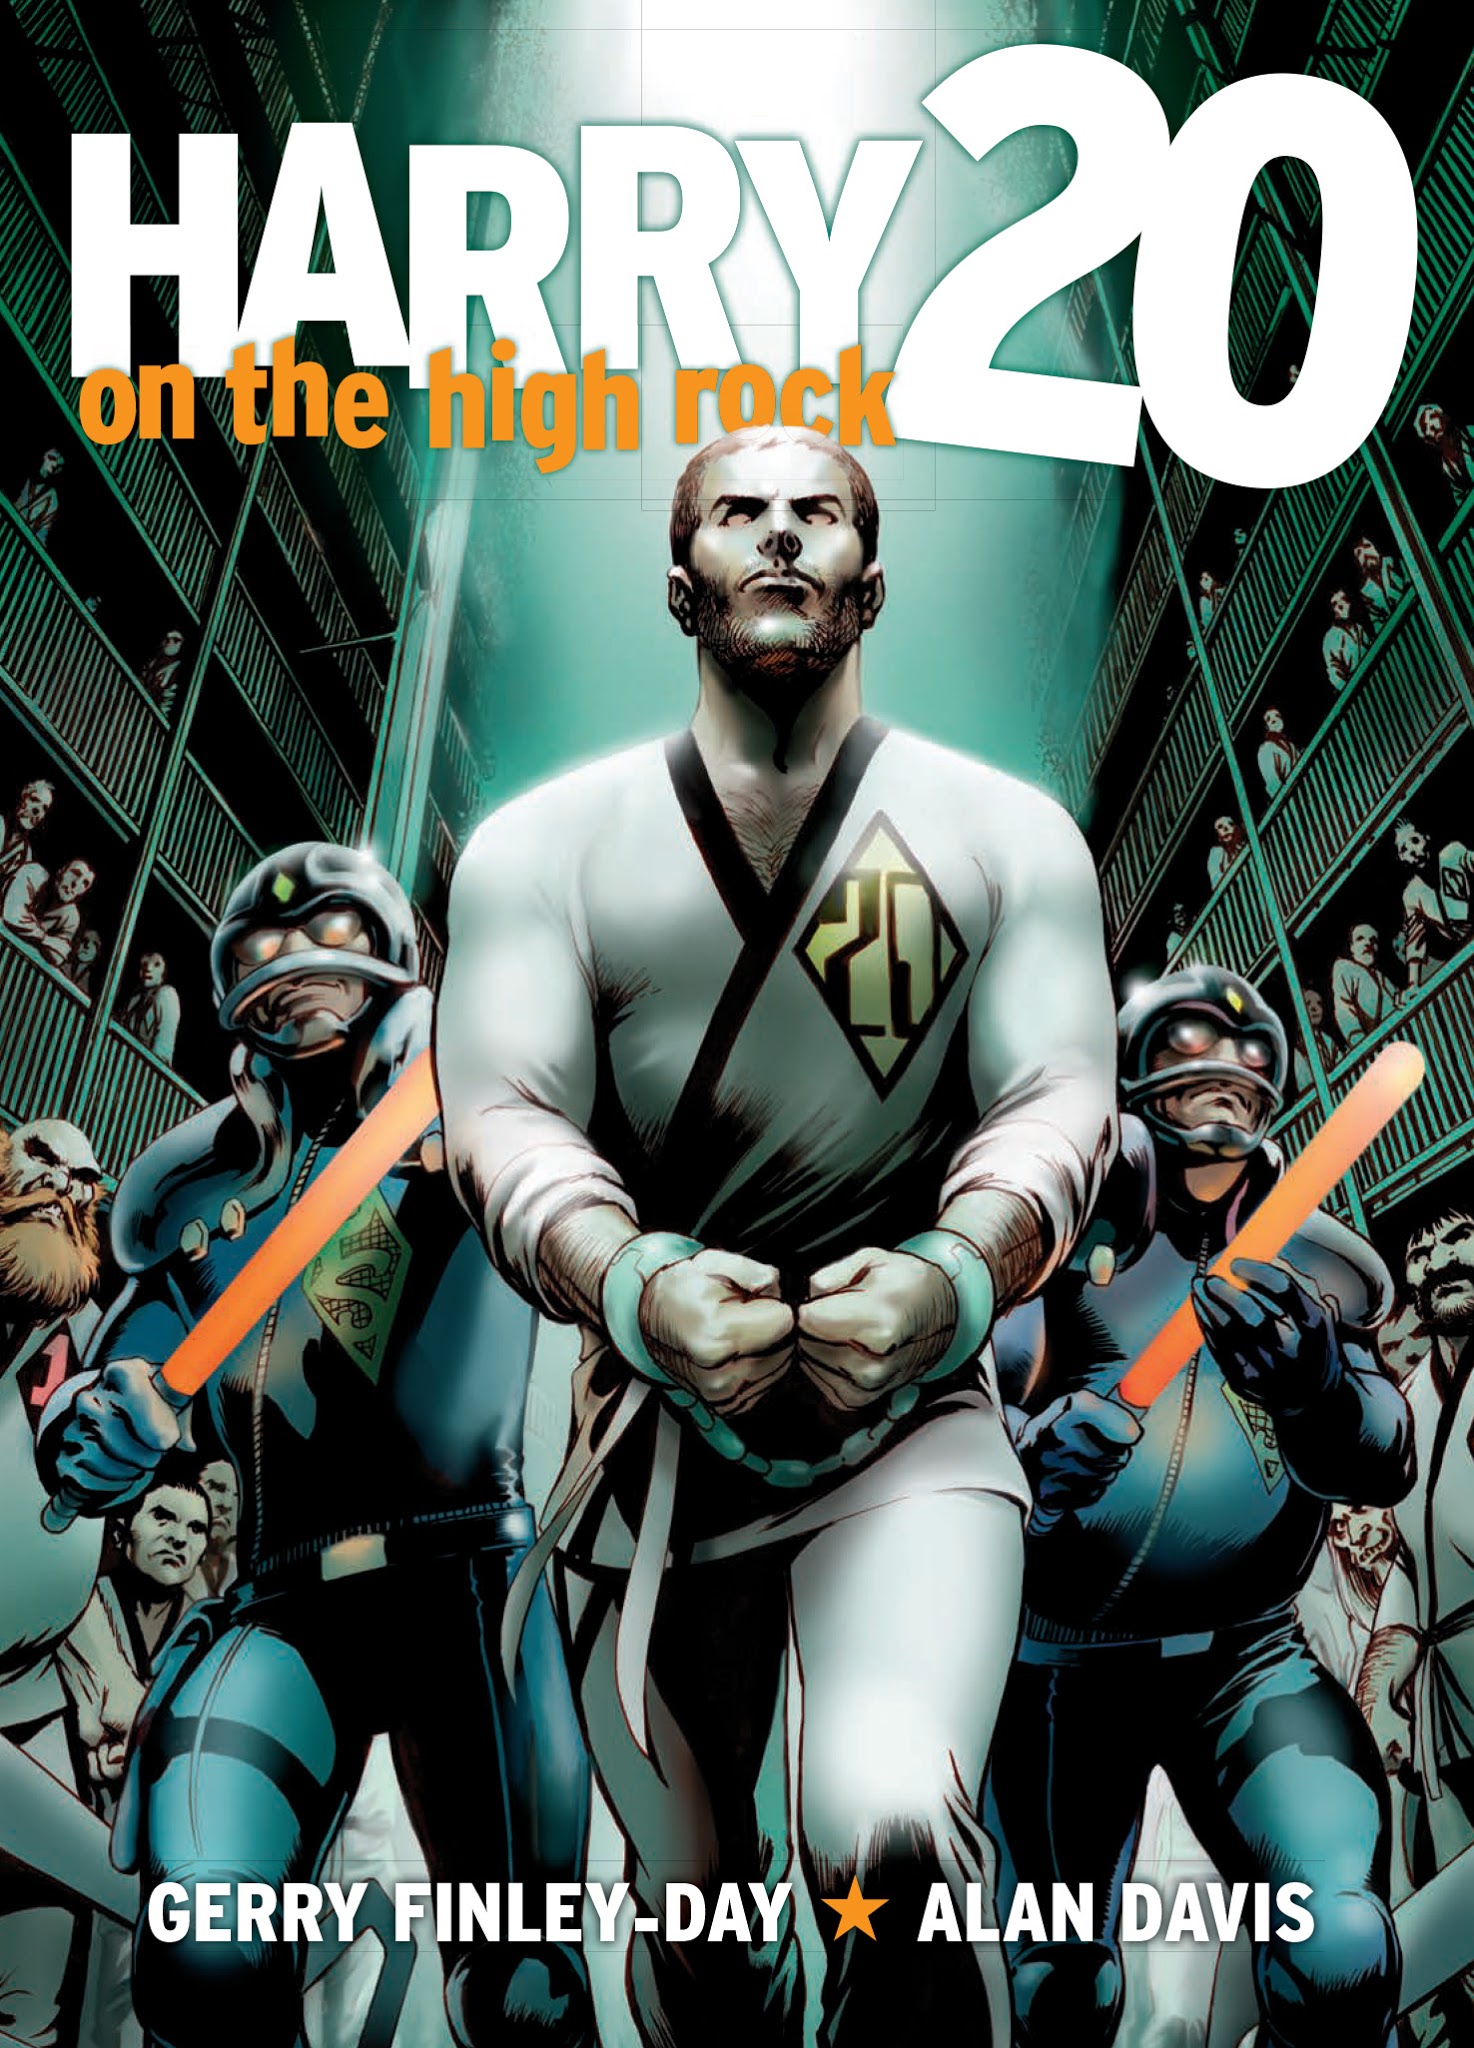 Read online Harry 20 on the High Rock comic -  Issue # TPB - 1